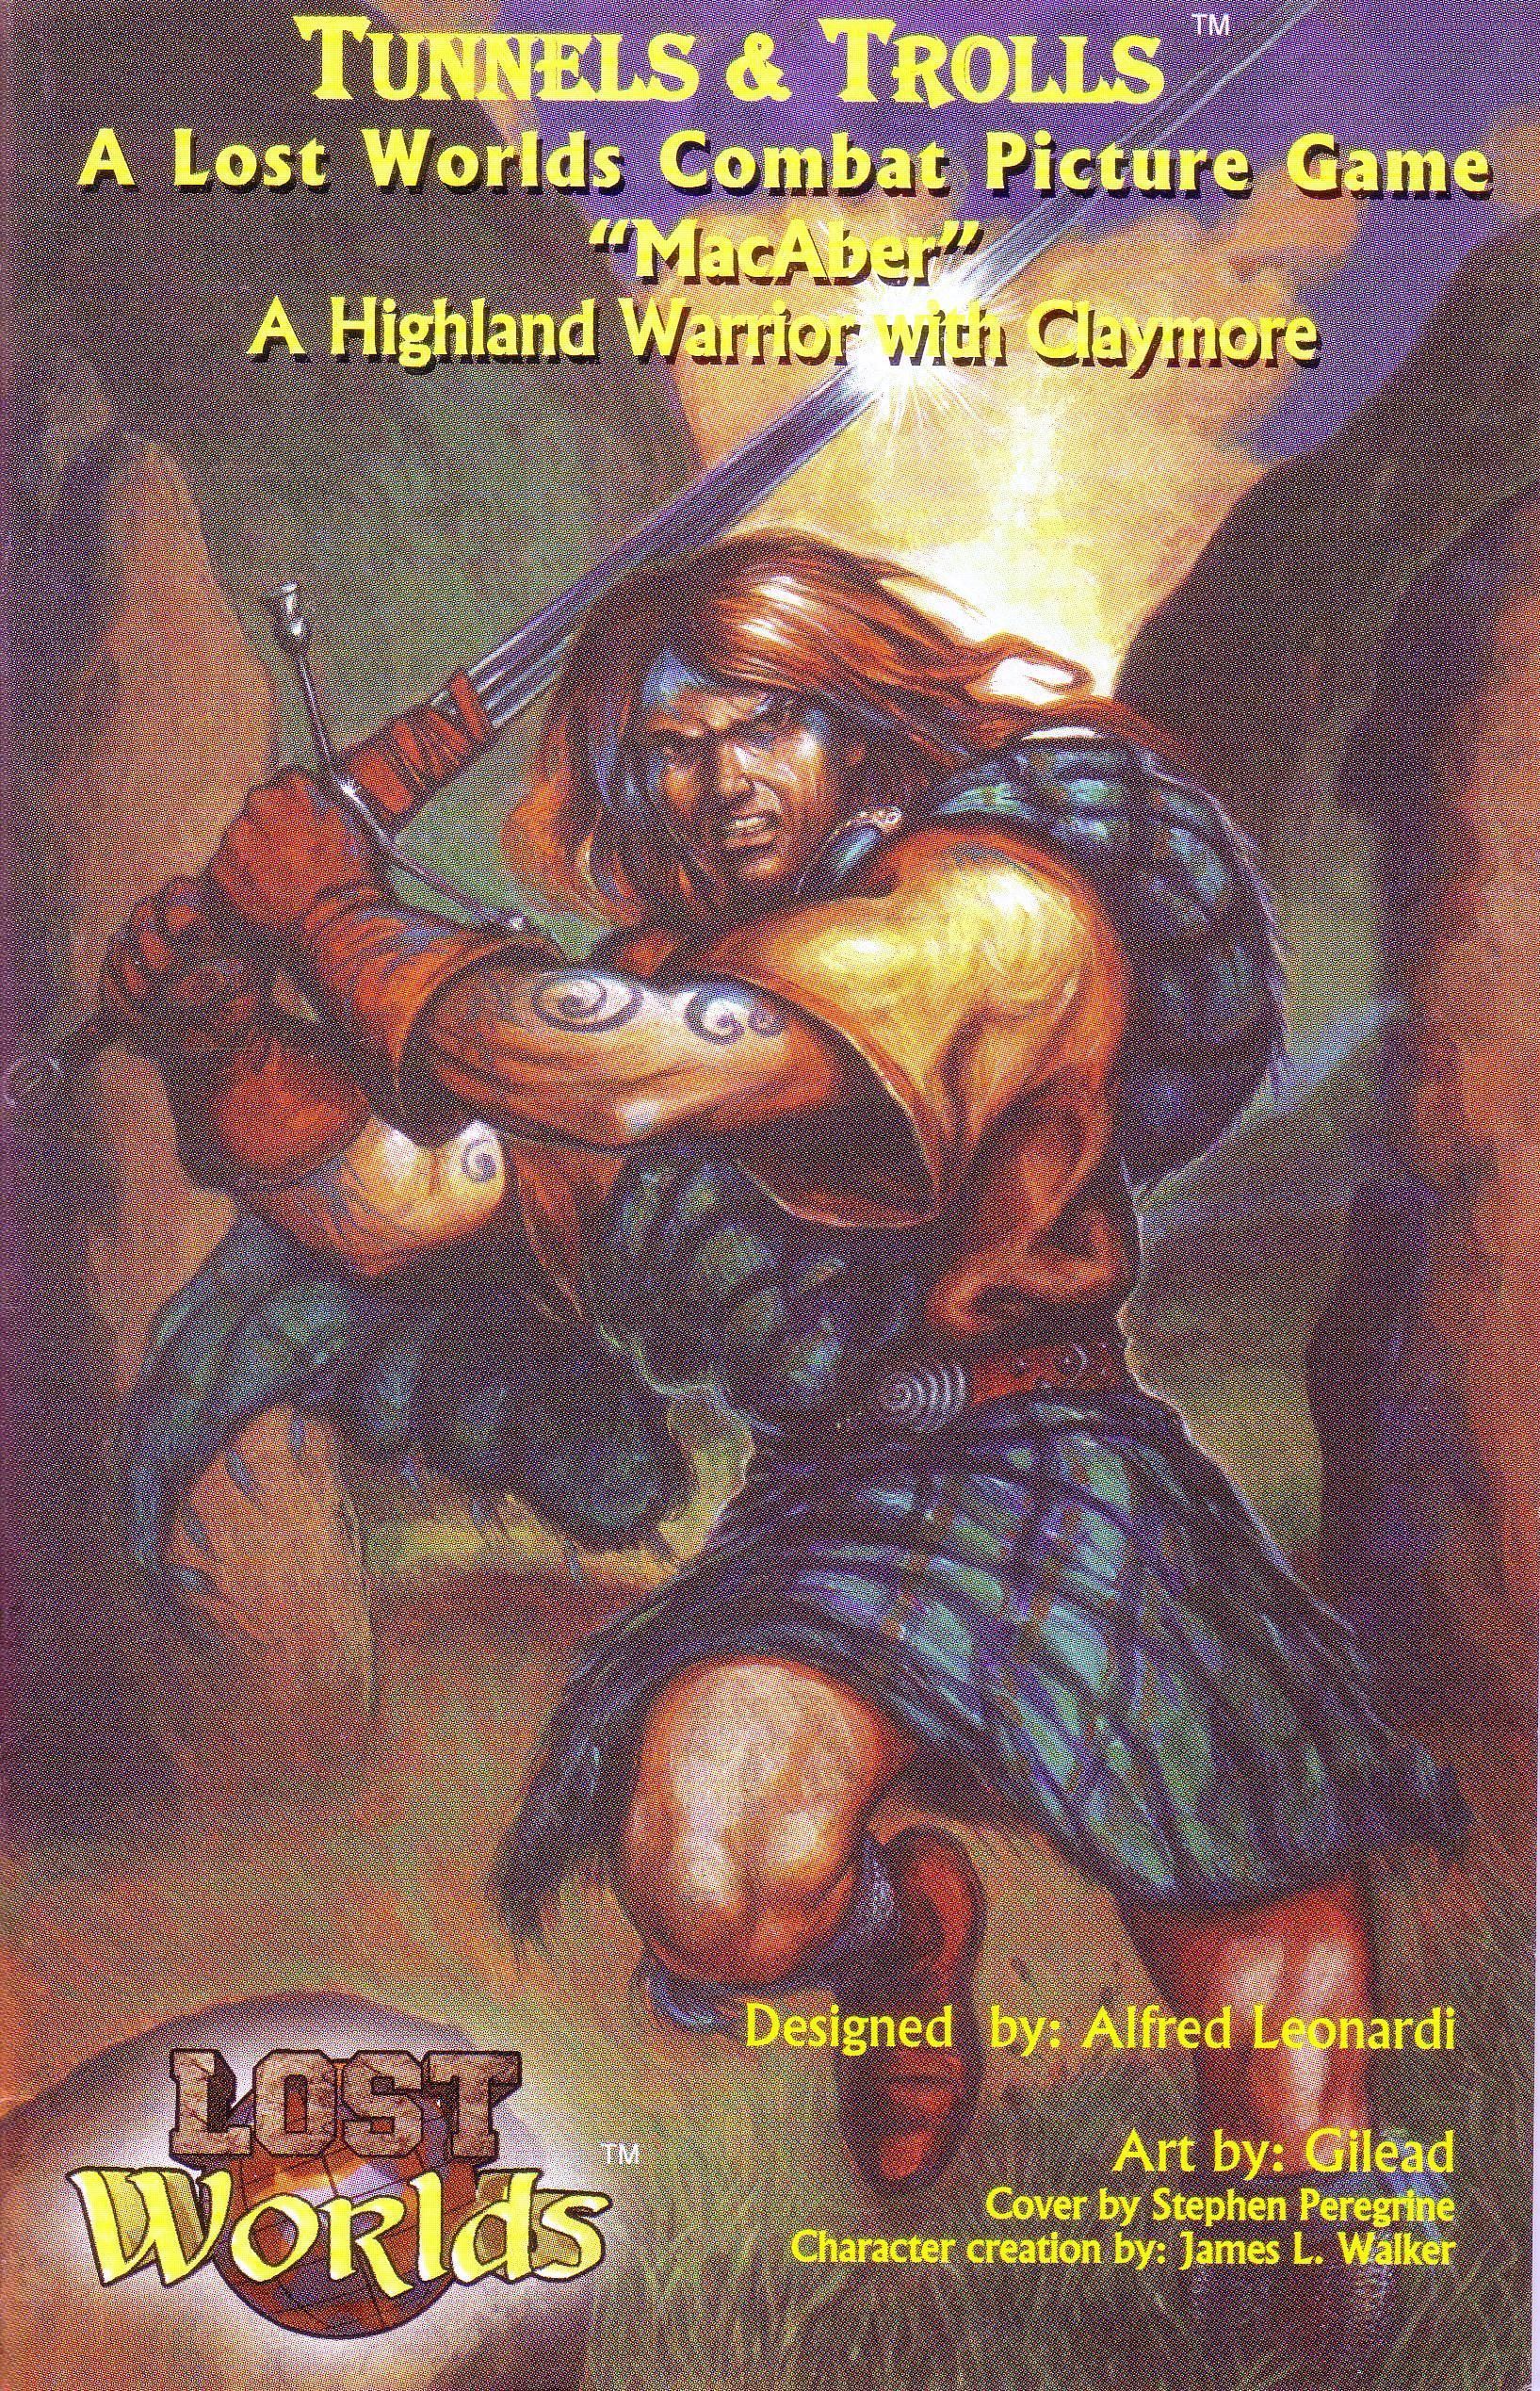 Lost Worlds: "MacAber" A Highland Warrior with Claymore